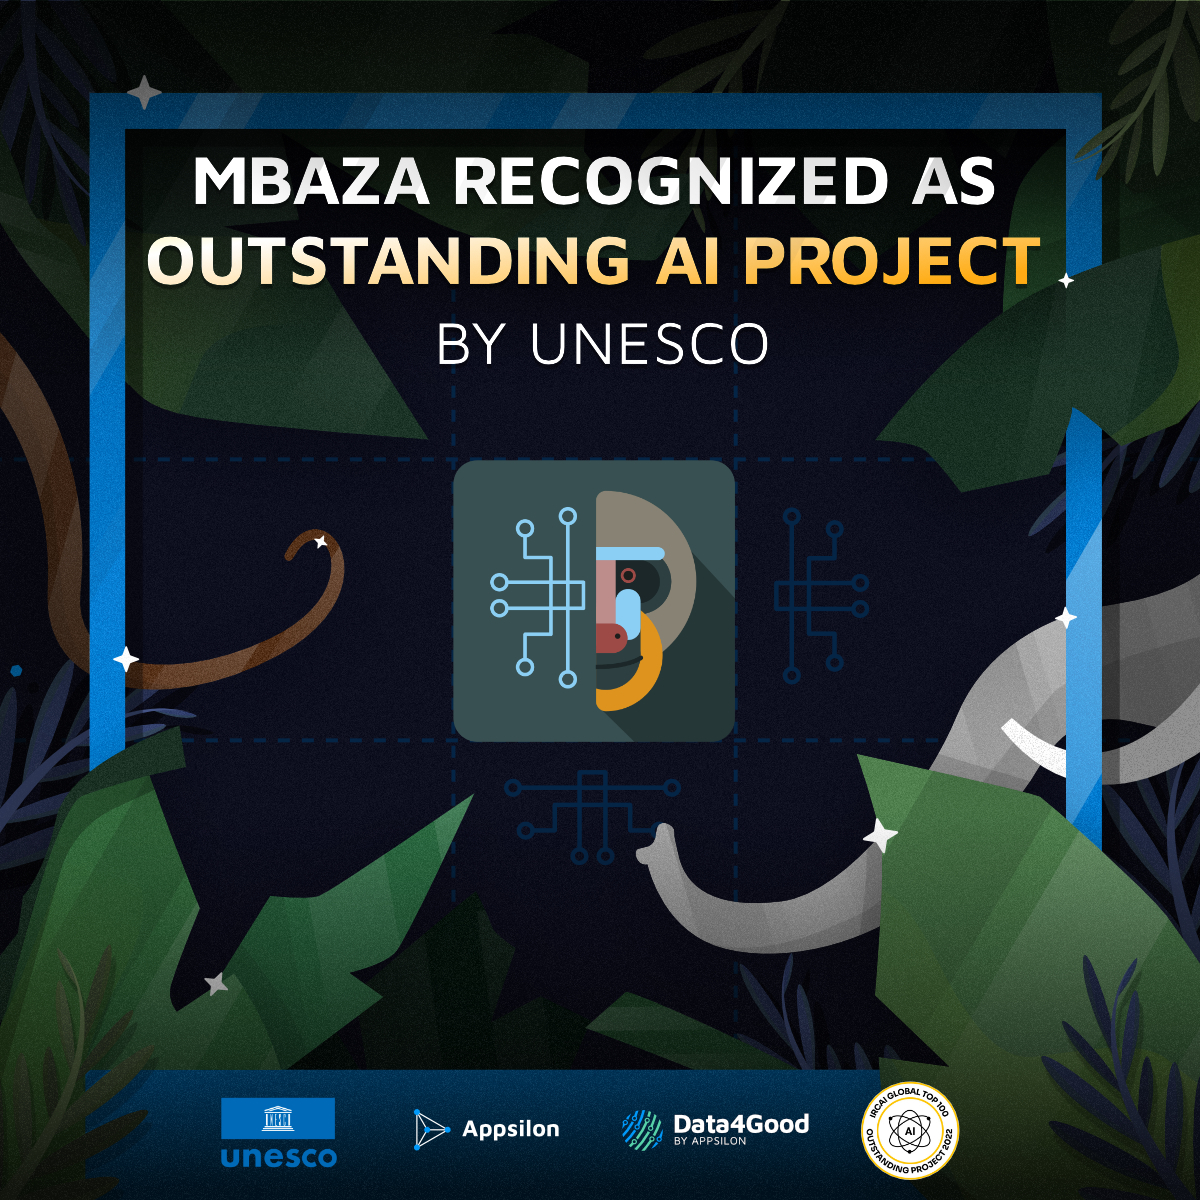 An image announcing that Appsilon's  flagship Data4Good project - Mbaza AI - has been recognized by UNESCO as one of the top 10 global projects contributing to the UN's Sustainable Development Goals!